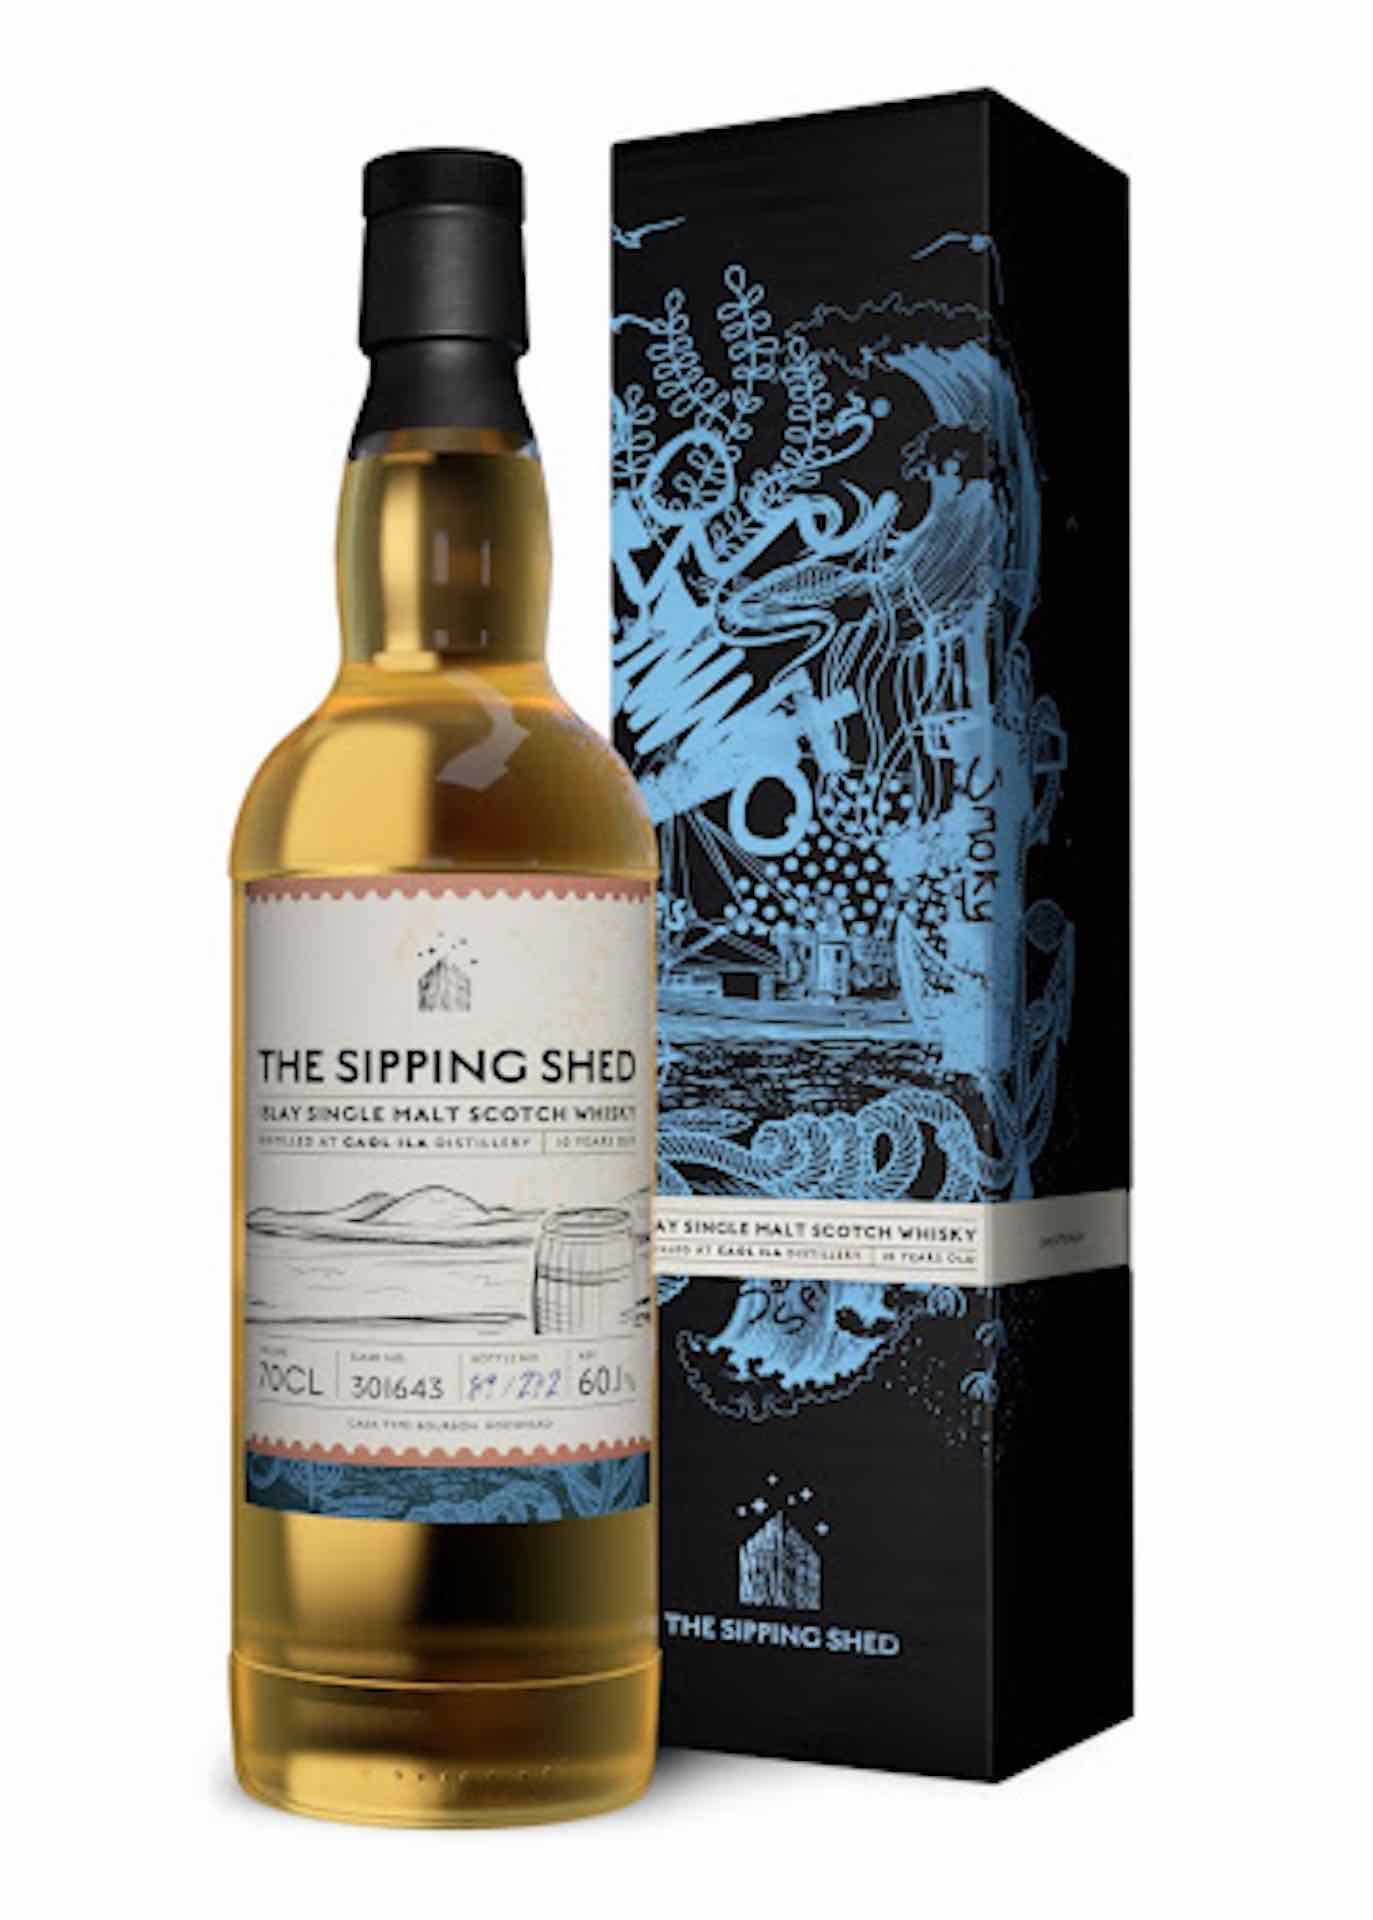 The Sipping Shed Caol Ila 10 Year Old Single Cask Whisky